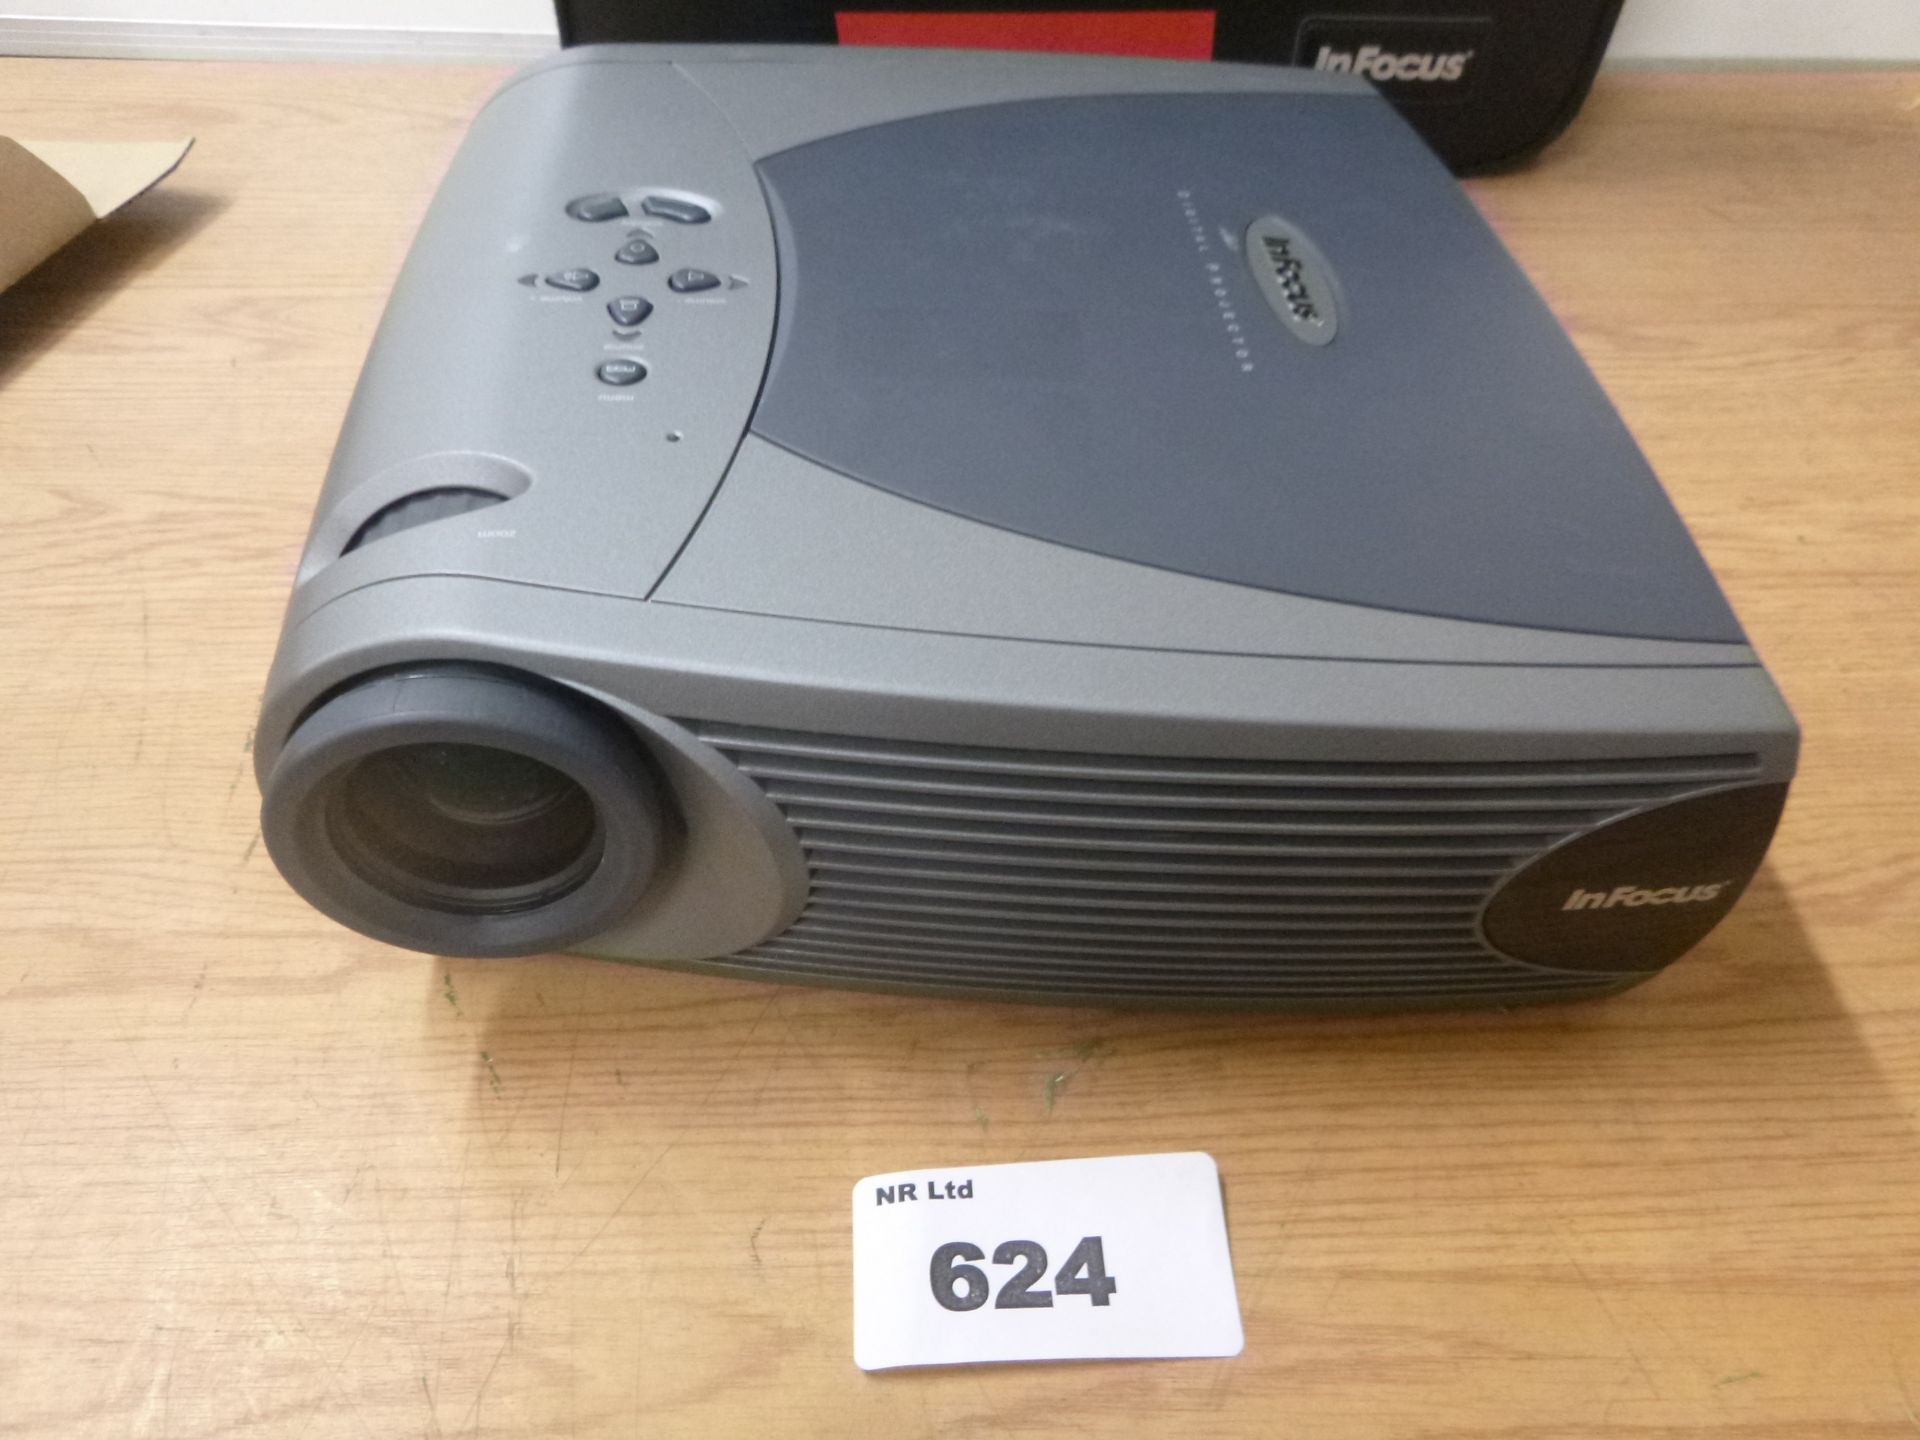 INFOCUS LP350 Projector. COMPLETE WITH CARRYCASE,REMOTE, USER GUIDE-SEE PHOTOS - Image 3 of 5